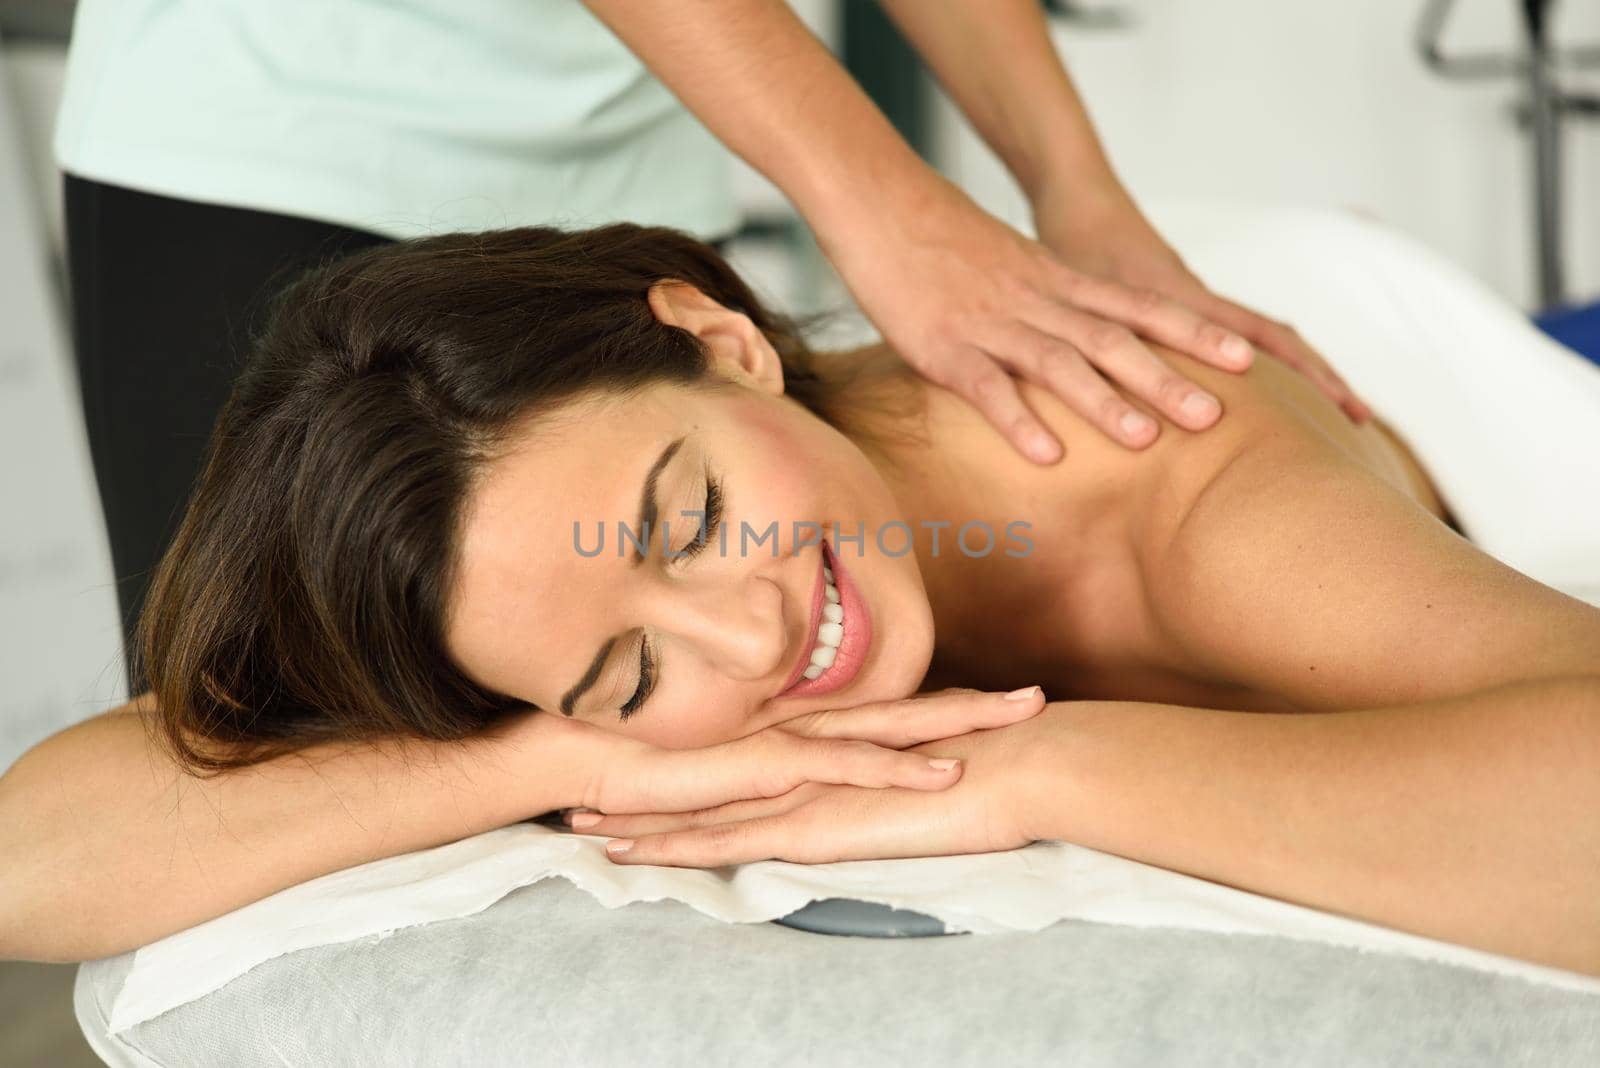 Young female receiving a relaxing back massage in a spa center. Brunette woman patient is receiving treatment by professional therapist.